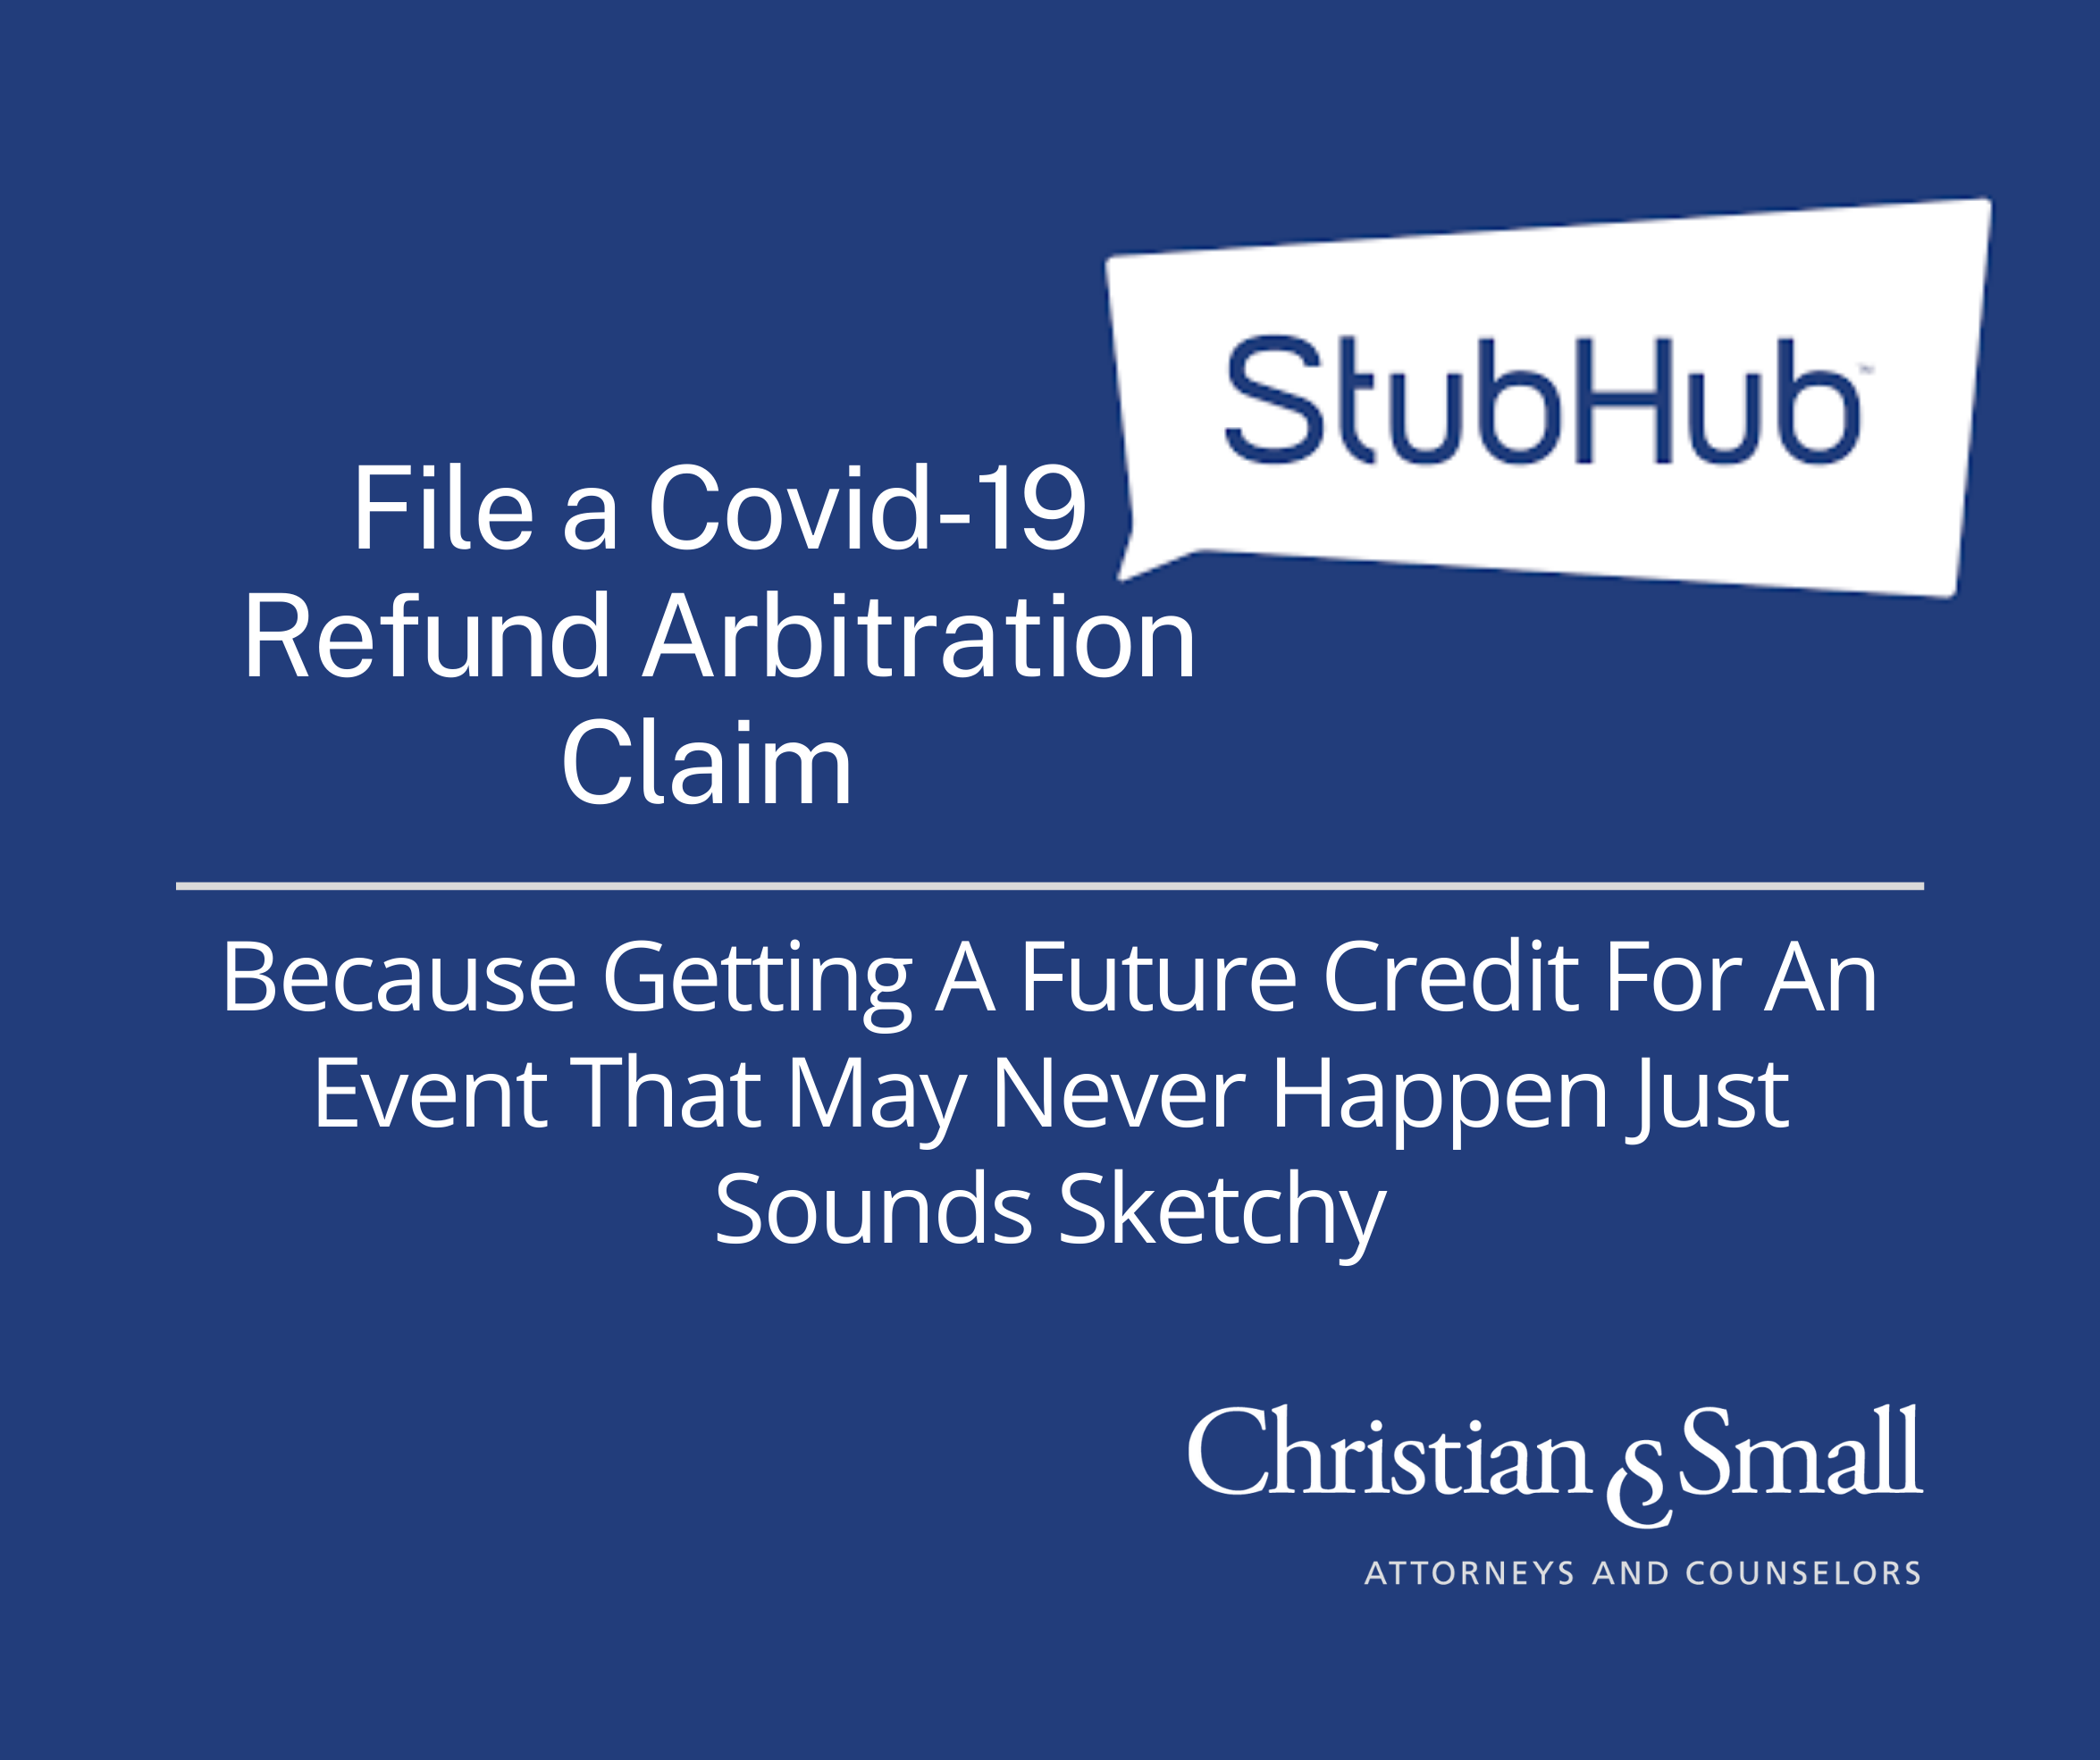 How to Get a Refund from StubHub – Because Getting a Future Credit for an Event That May Never Happen Just Sounds Sketchy